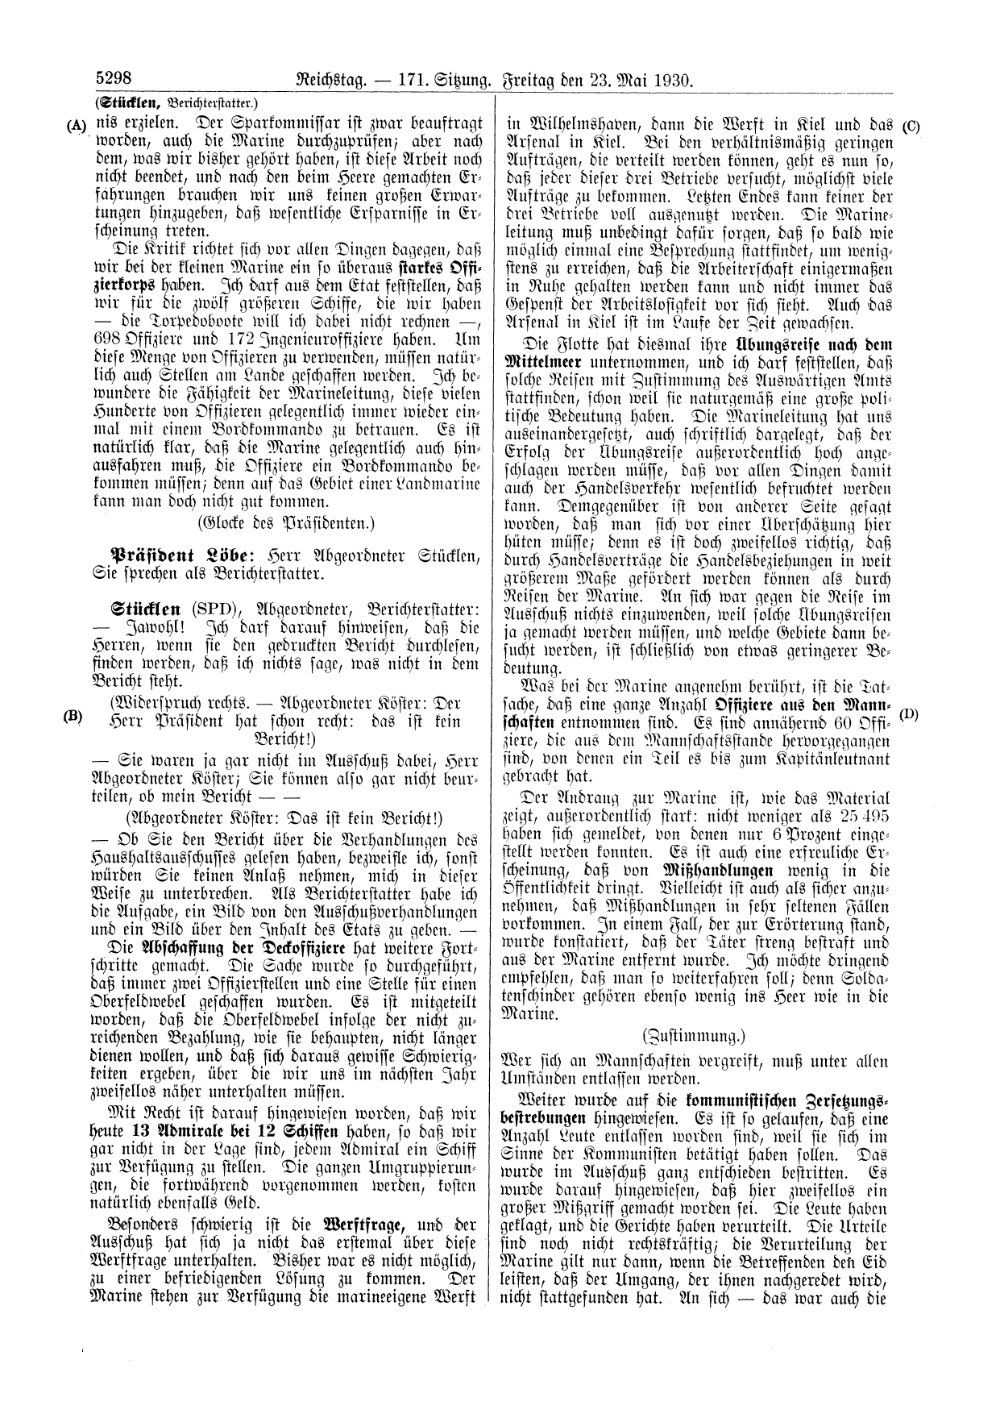 Scan of page 5298